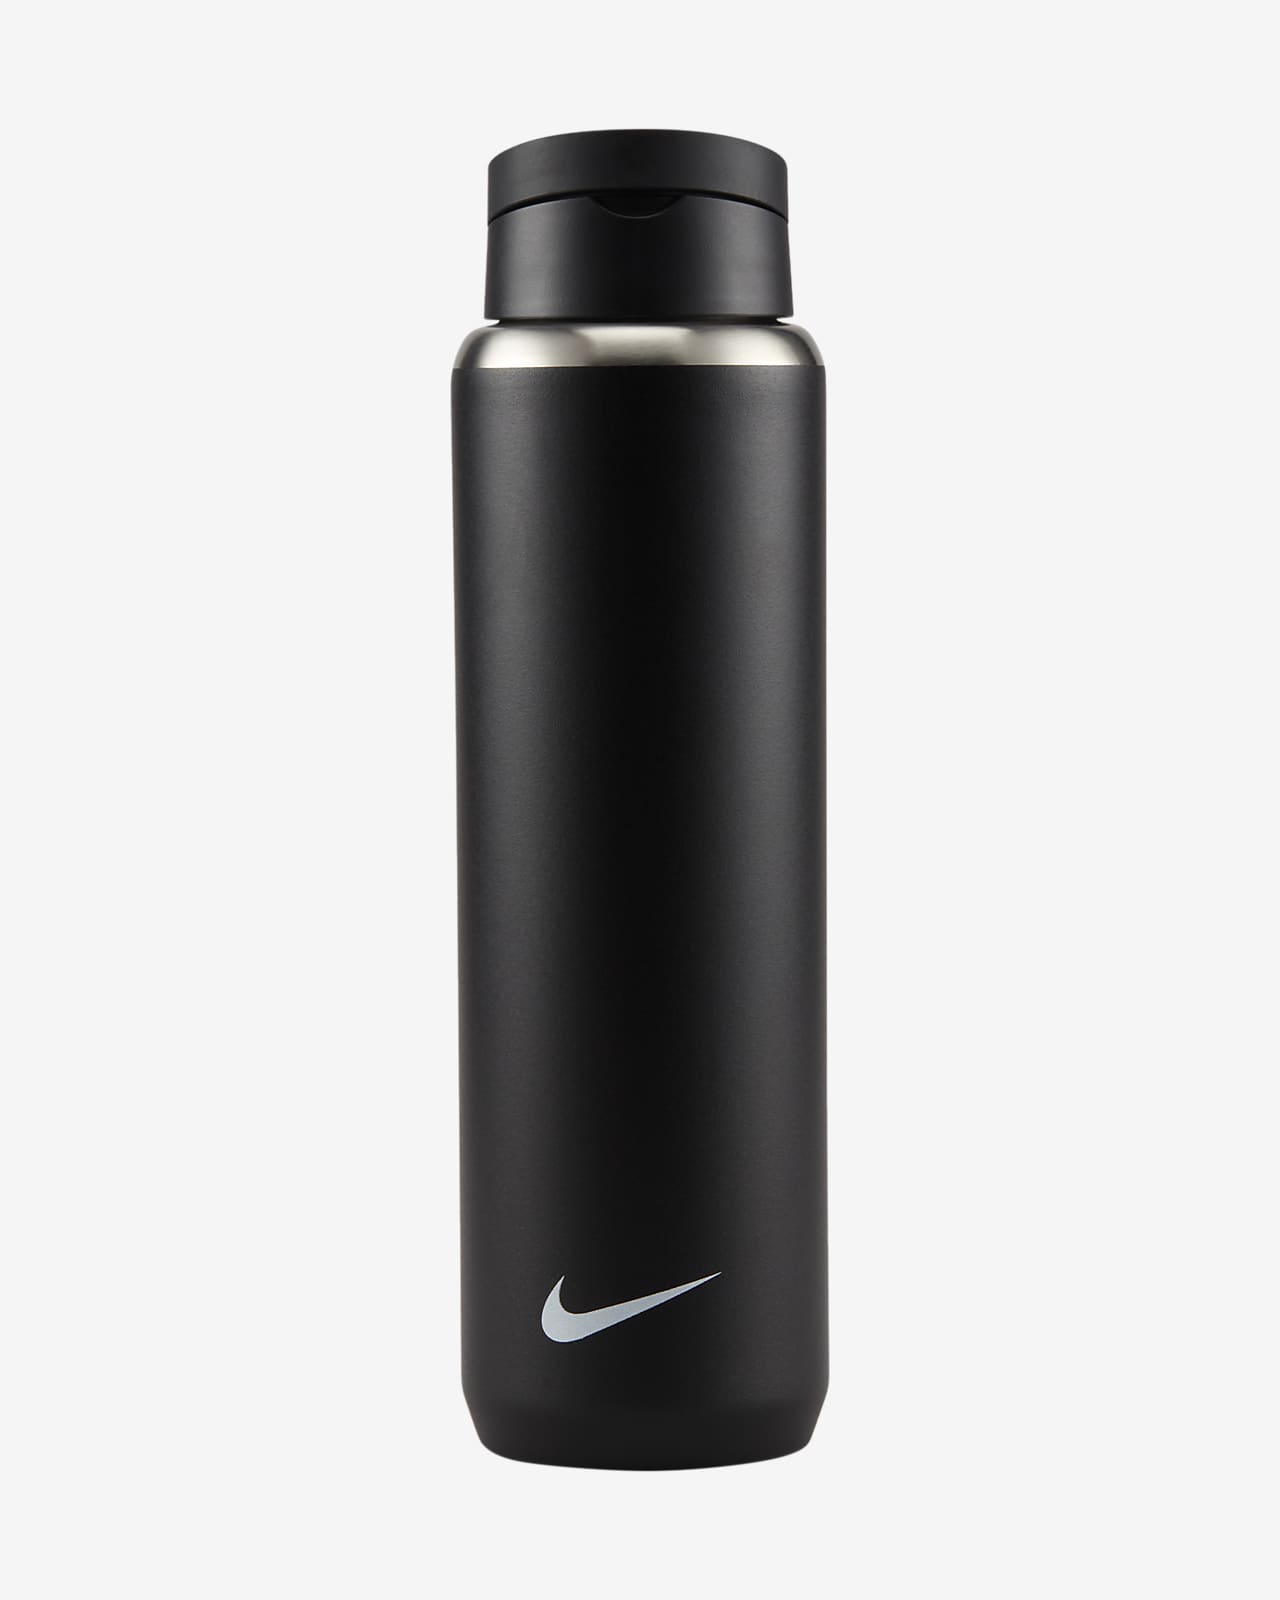 Nike Recharge Stainless Steel Straw Bottle (710ml approx.)